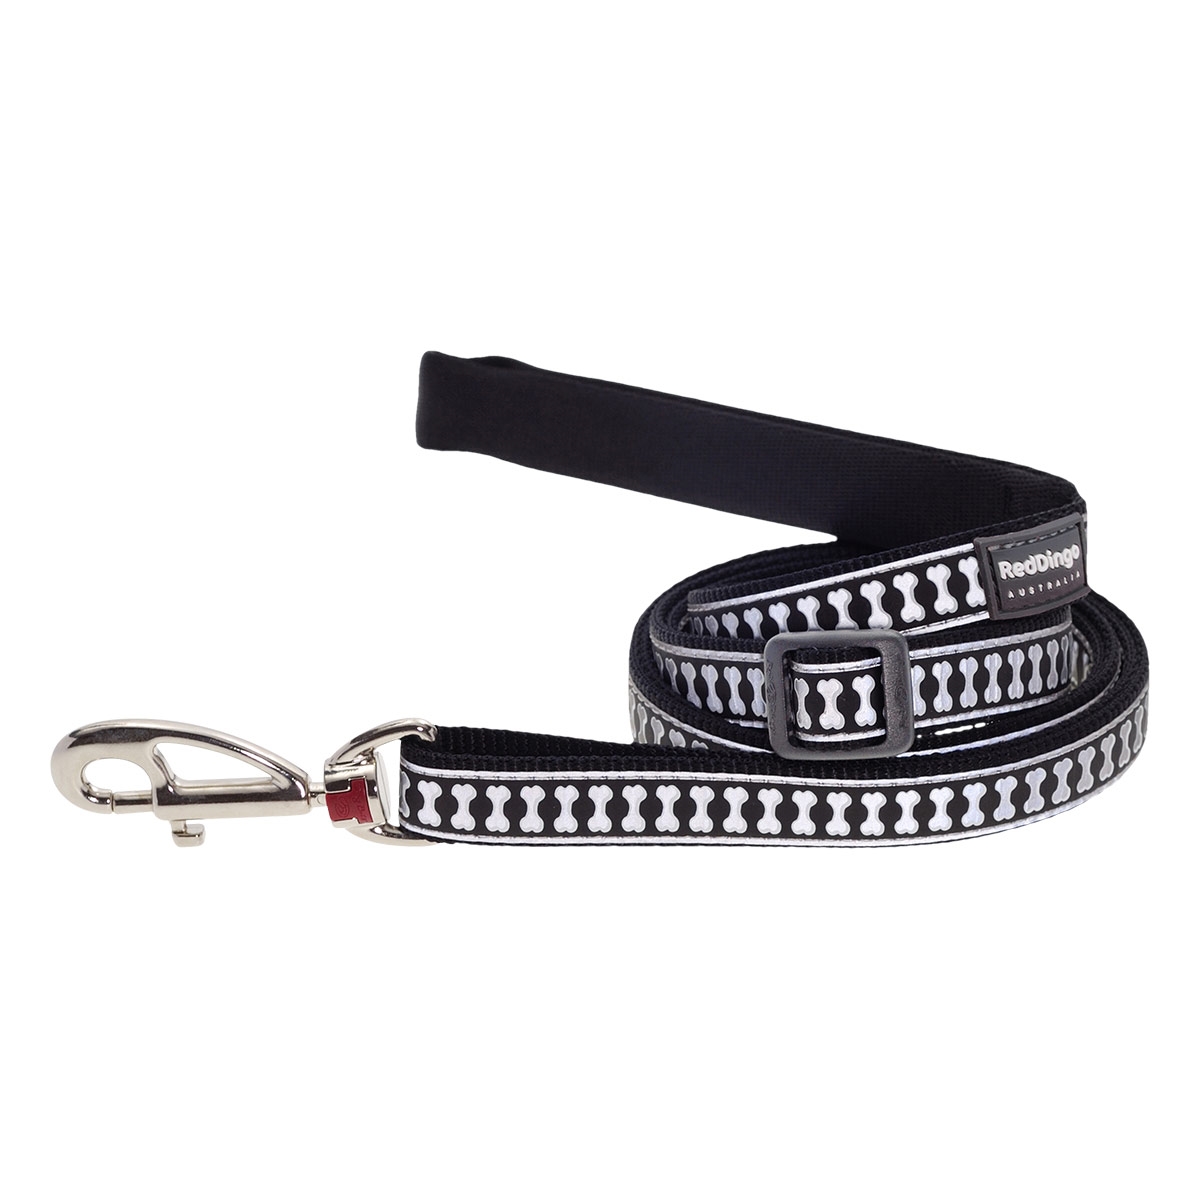 Picture of Red Dingo L6-RB-BB-15 Dog Lead Reflective Bones Black - Small 6ft